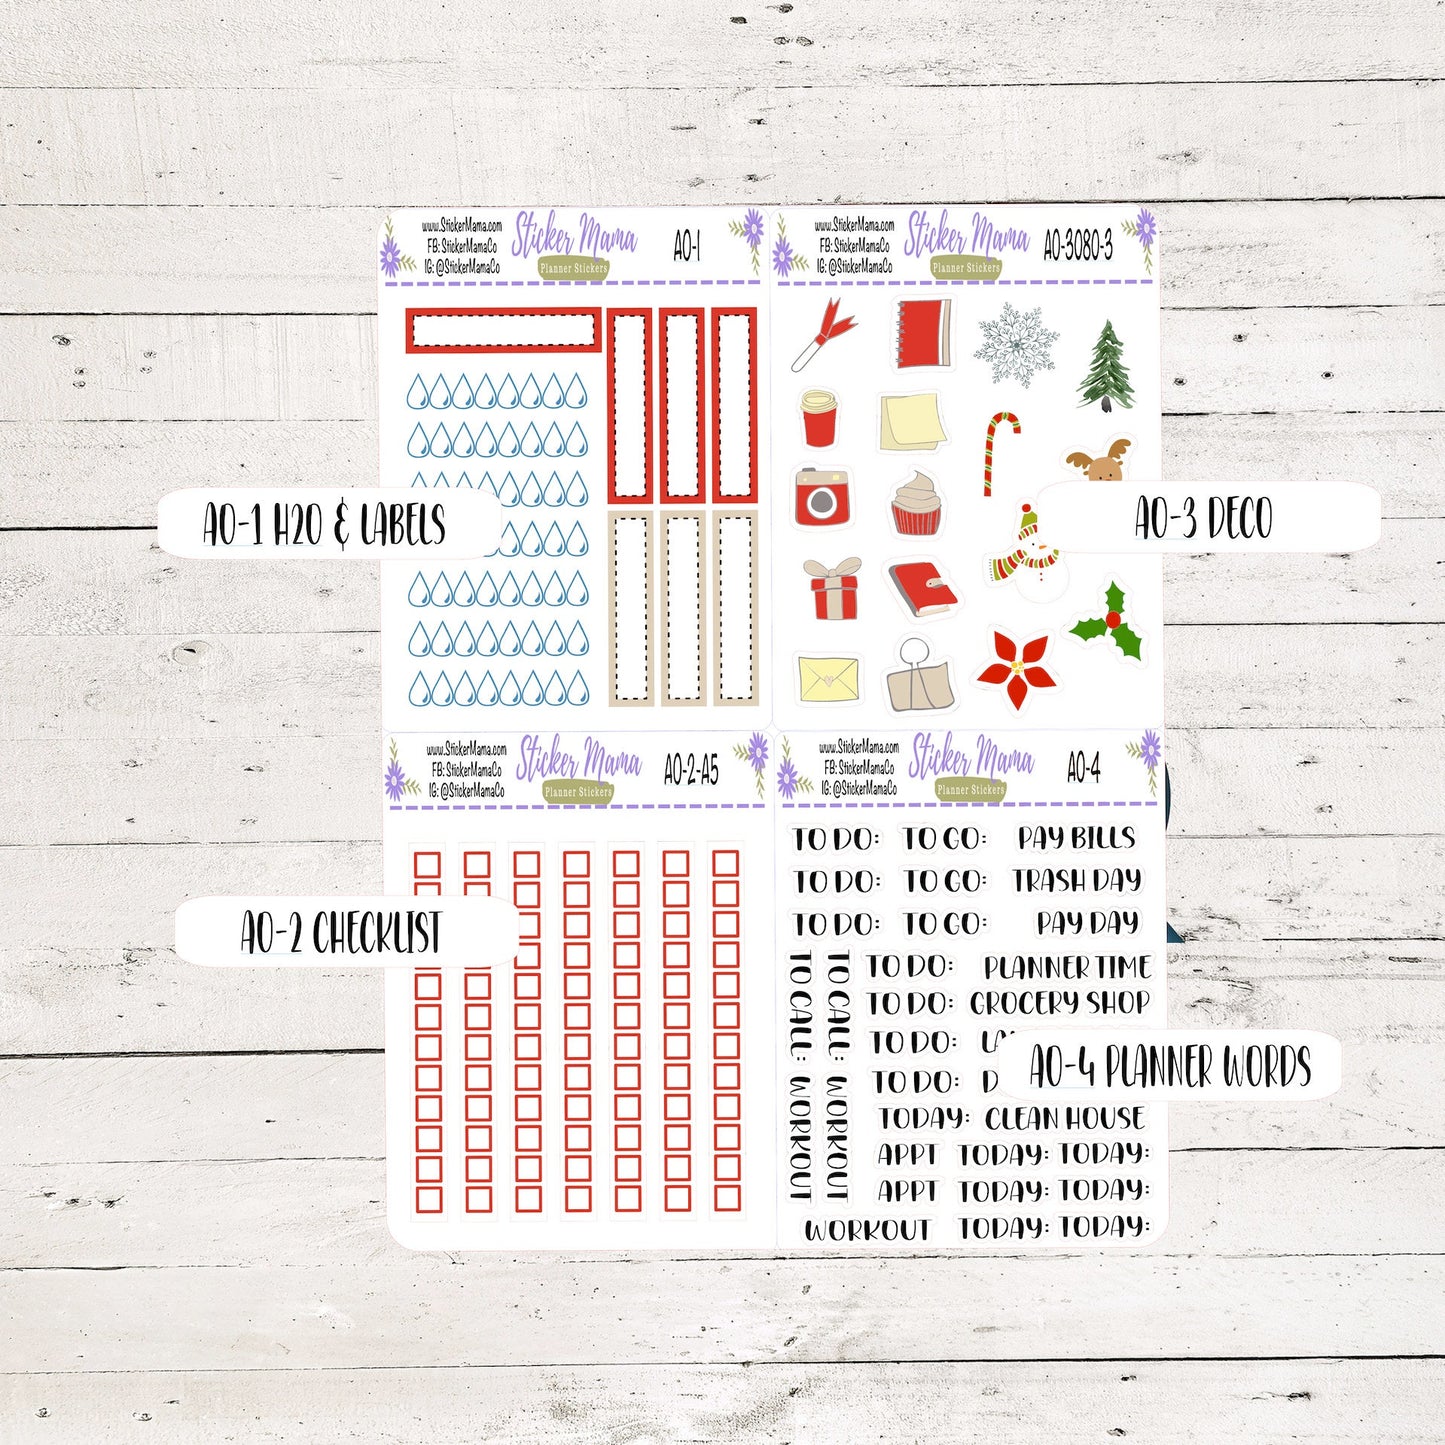 A5 Daily Duo - 3080a - Traditional Christmas 2 - December Planner Stickers - Daily Duo A5Planner - Daily Duo Stickers - Daily Planner